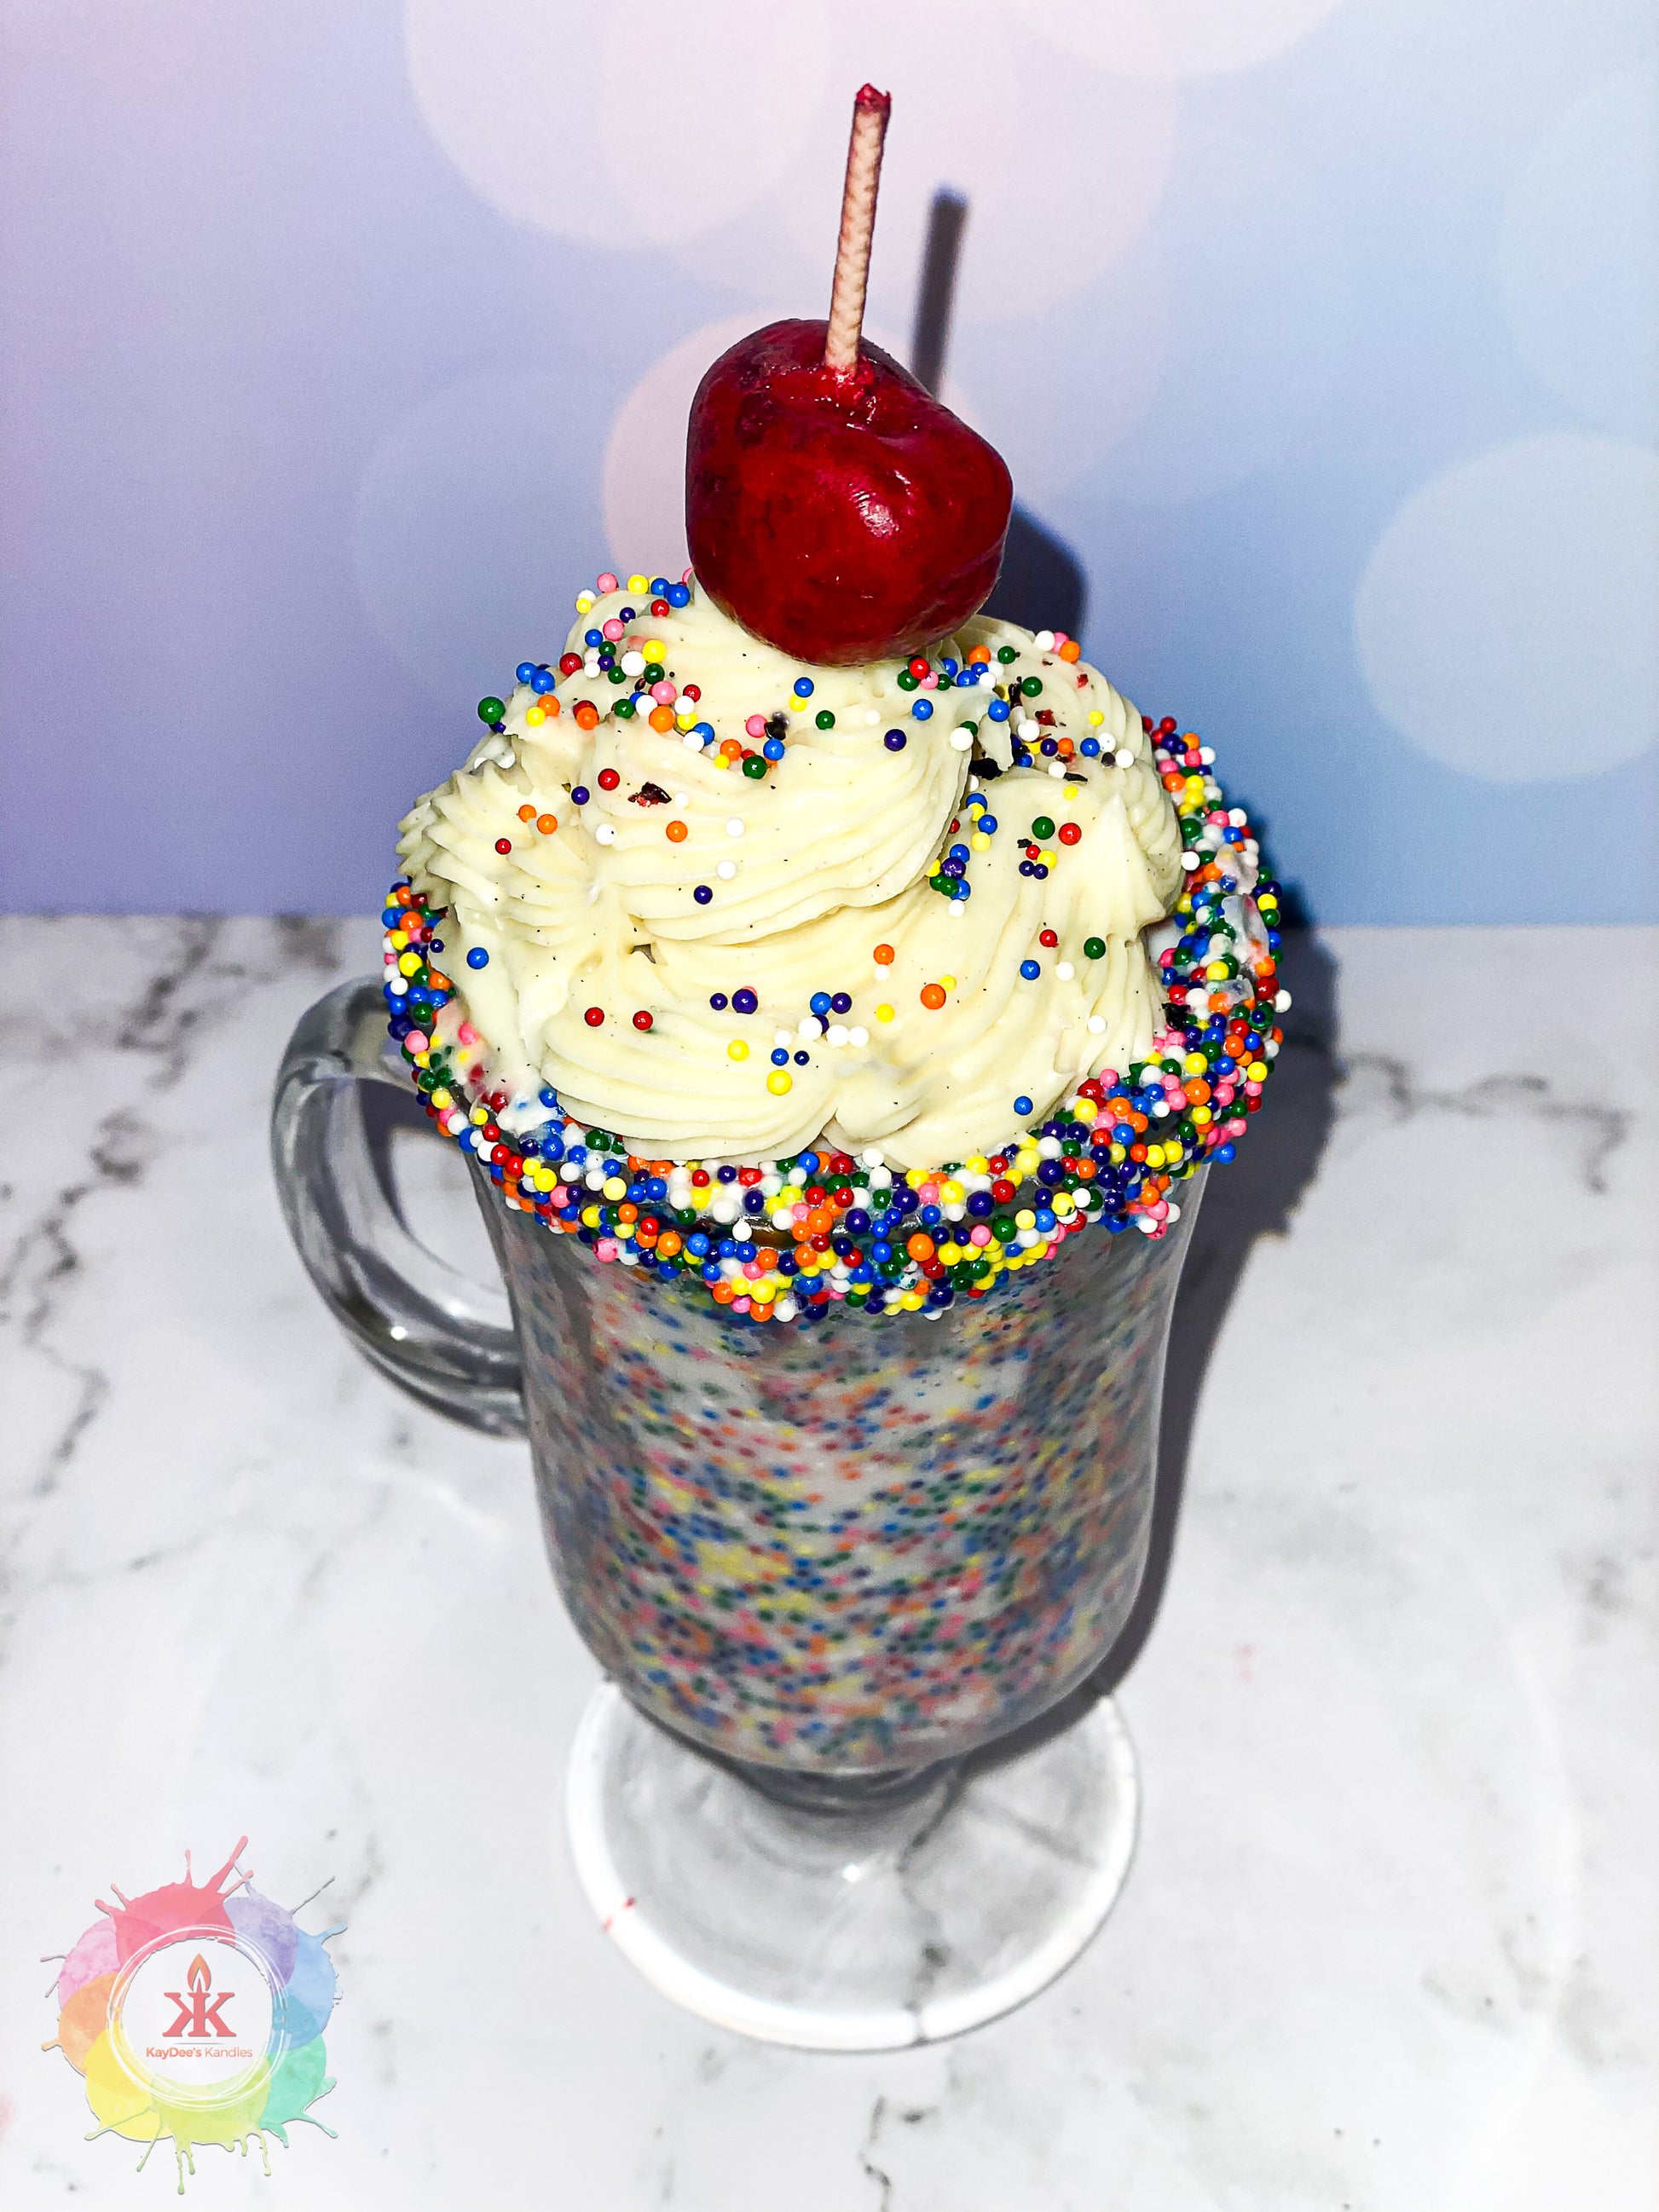 Photo of candle resembling a birthday cake milkshake with cherry on top.